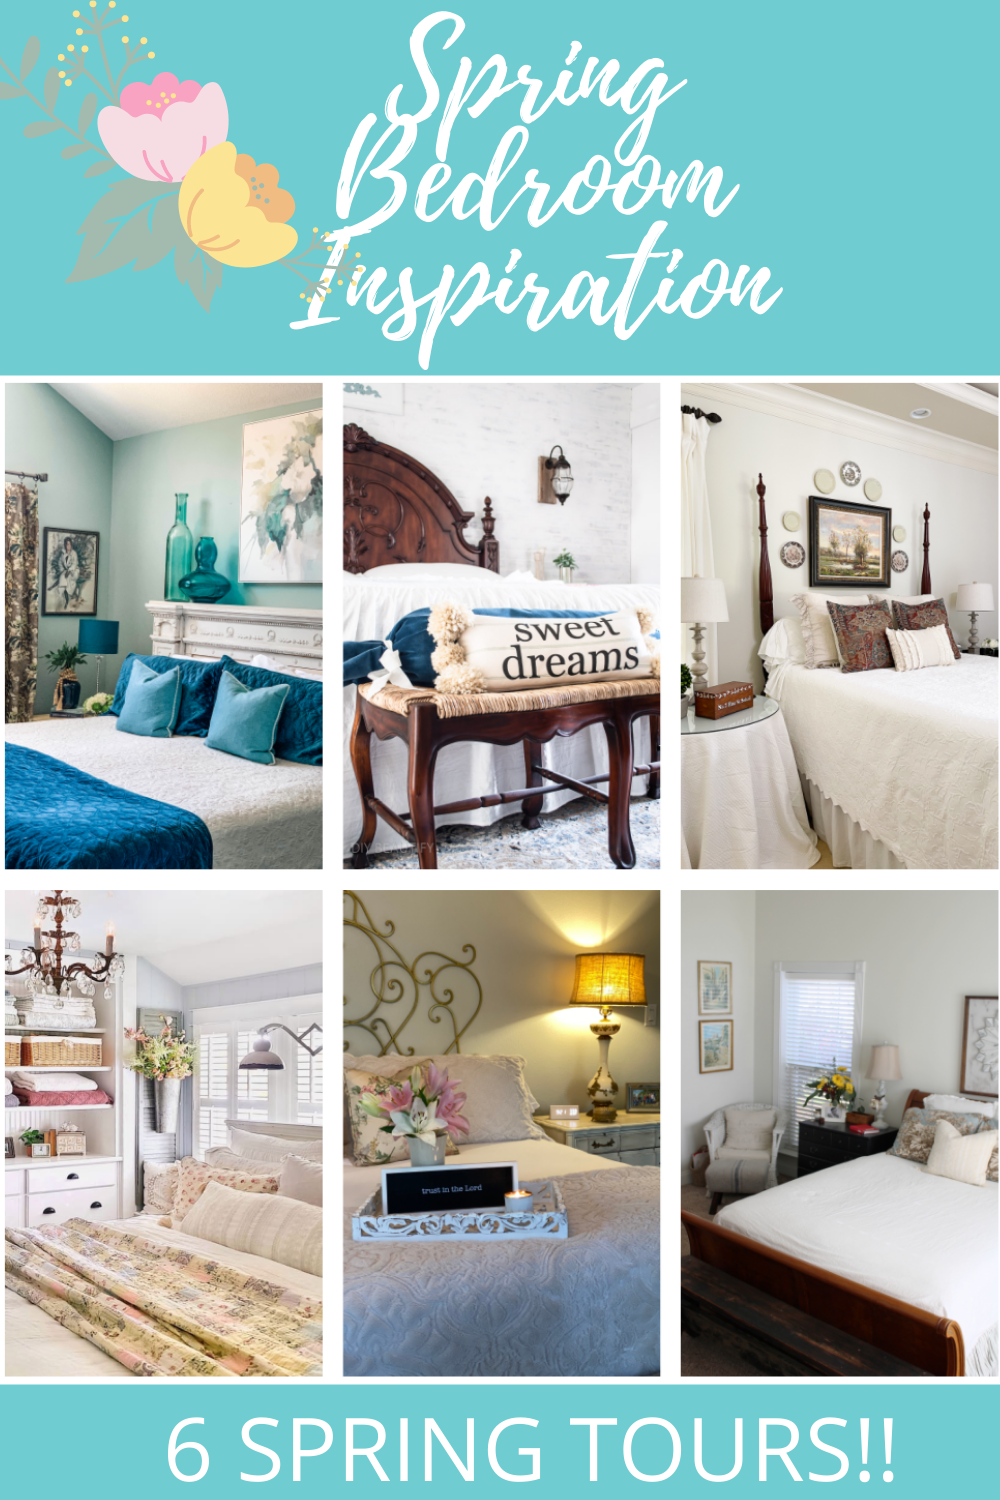 Simple steps to adding Spring touches to your master bedroom